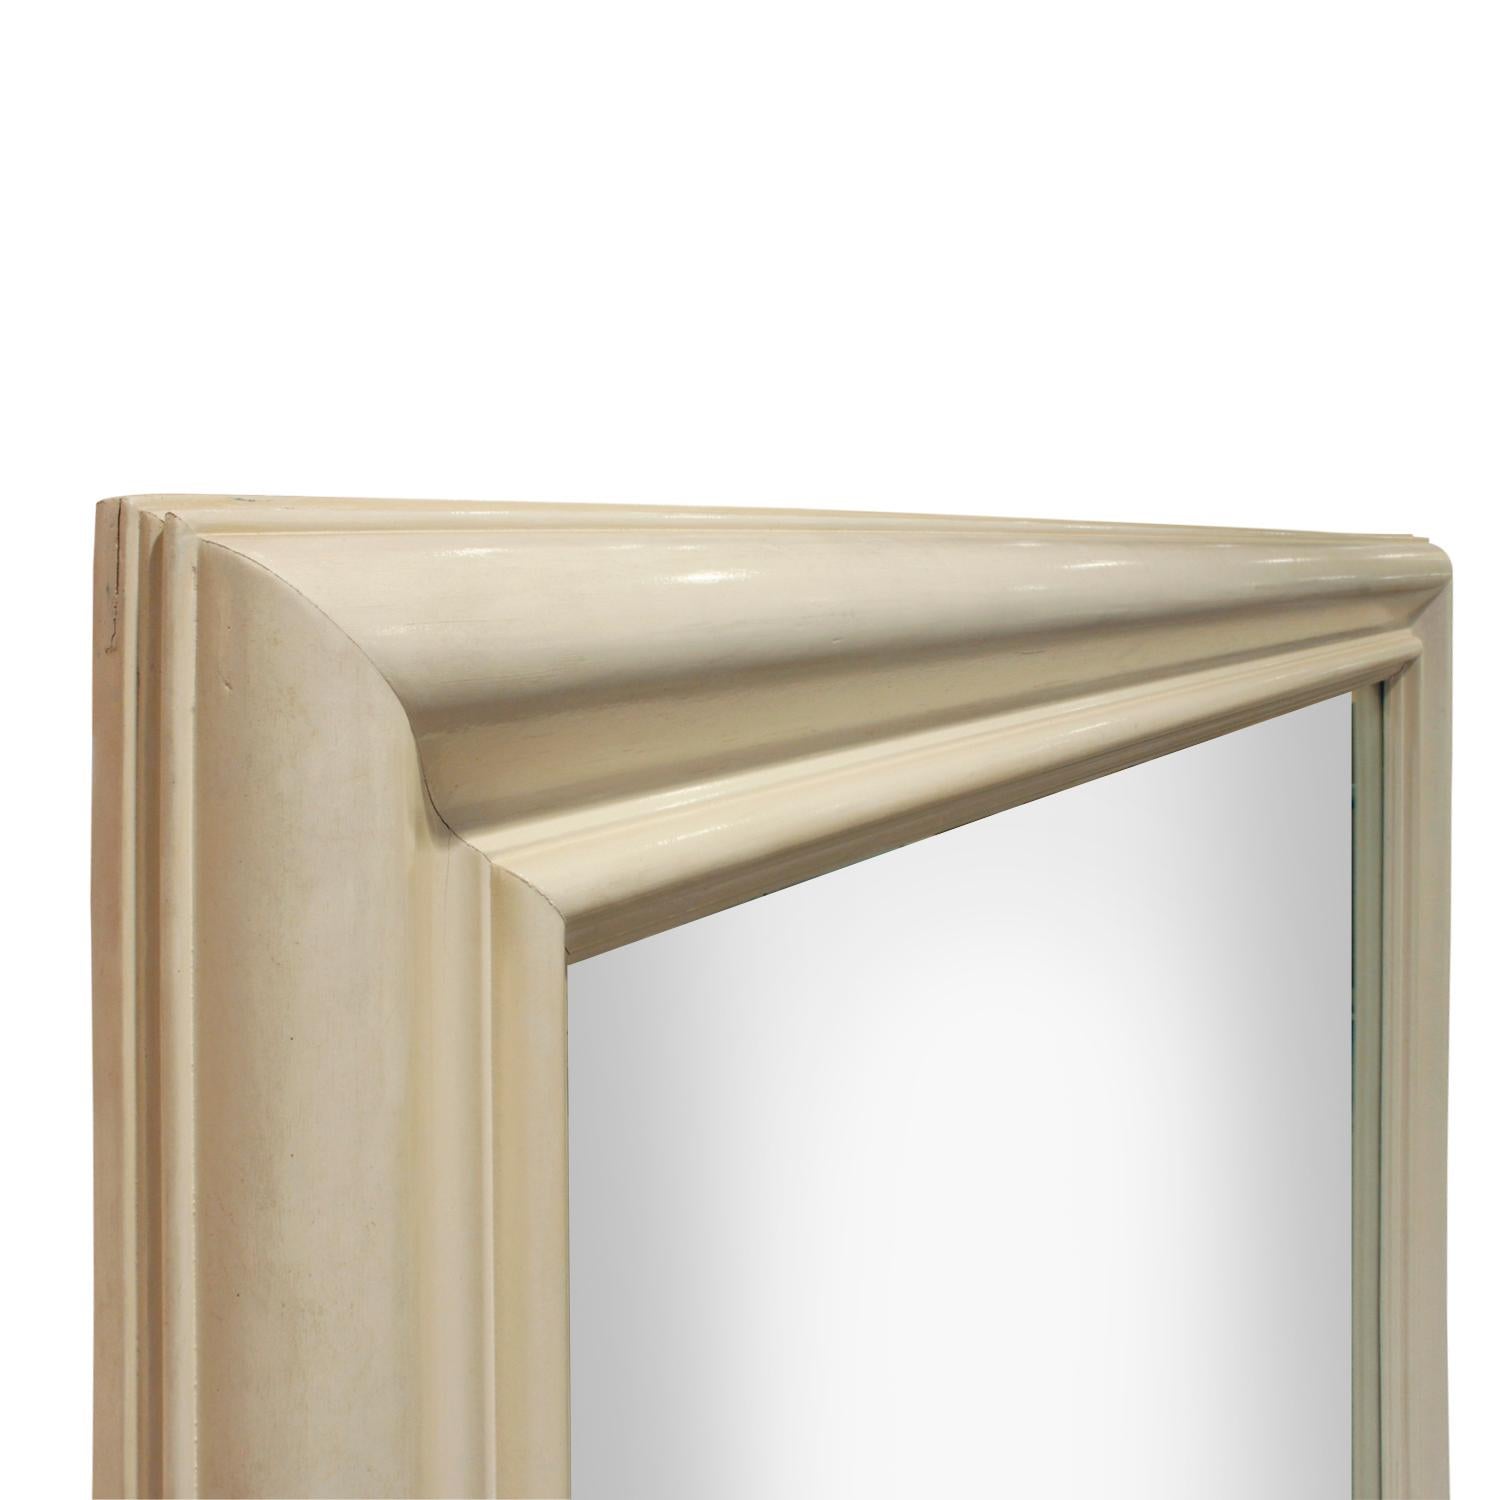 American Large Molding Mirror in Ivory Lacquer, 1970s For Sale